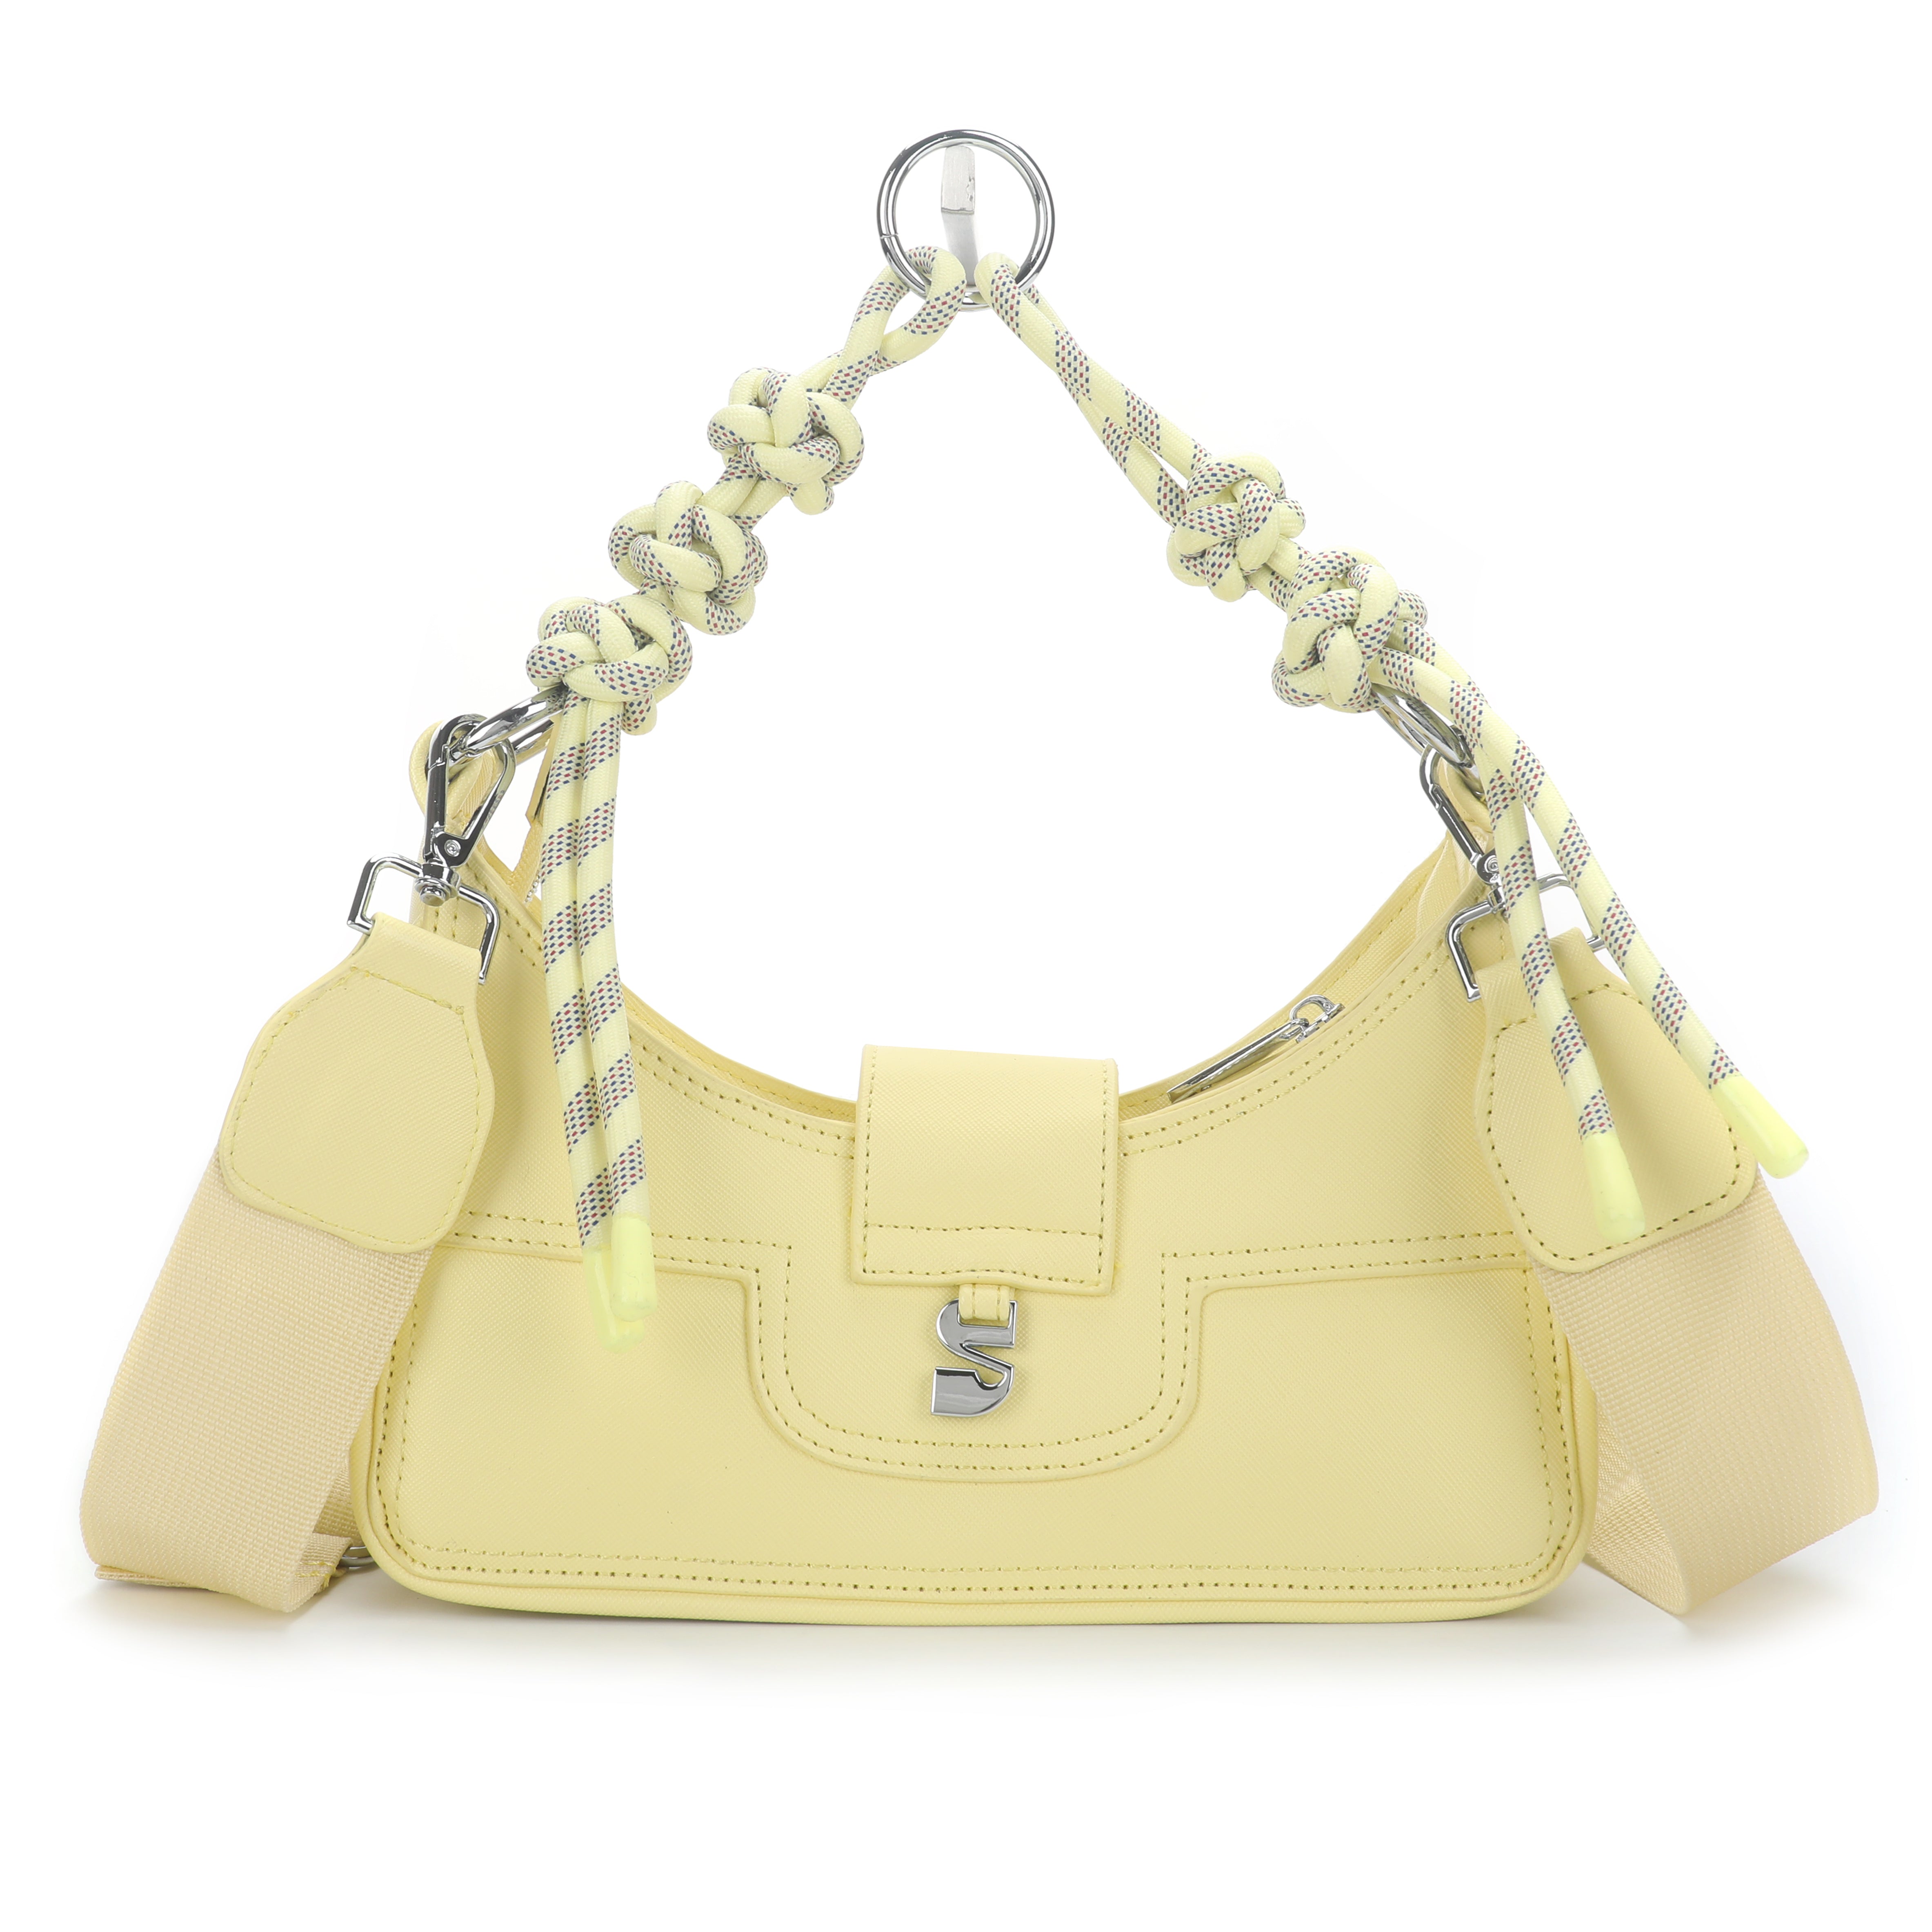 THE RECYCLED ALBA SHOULDER BAG - LIGHT YELLOW - EXCLUSIVE Bags from SILFEN STUDIO - Just €79.99! SHOP NOW AT IAMINHATELOVE BOTH IN STORE FOR CYPRUS AND ONLINE WORLDWIDE @ IAMINHATELOVE.COM